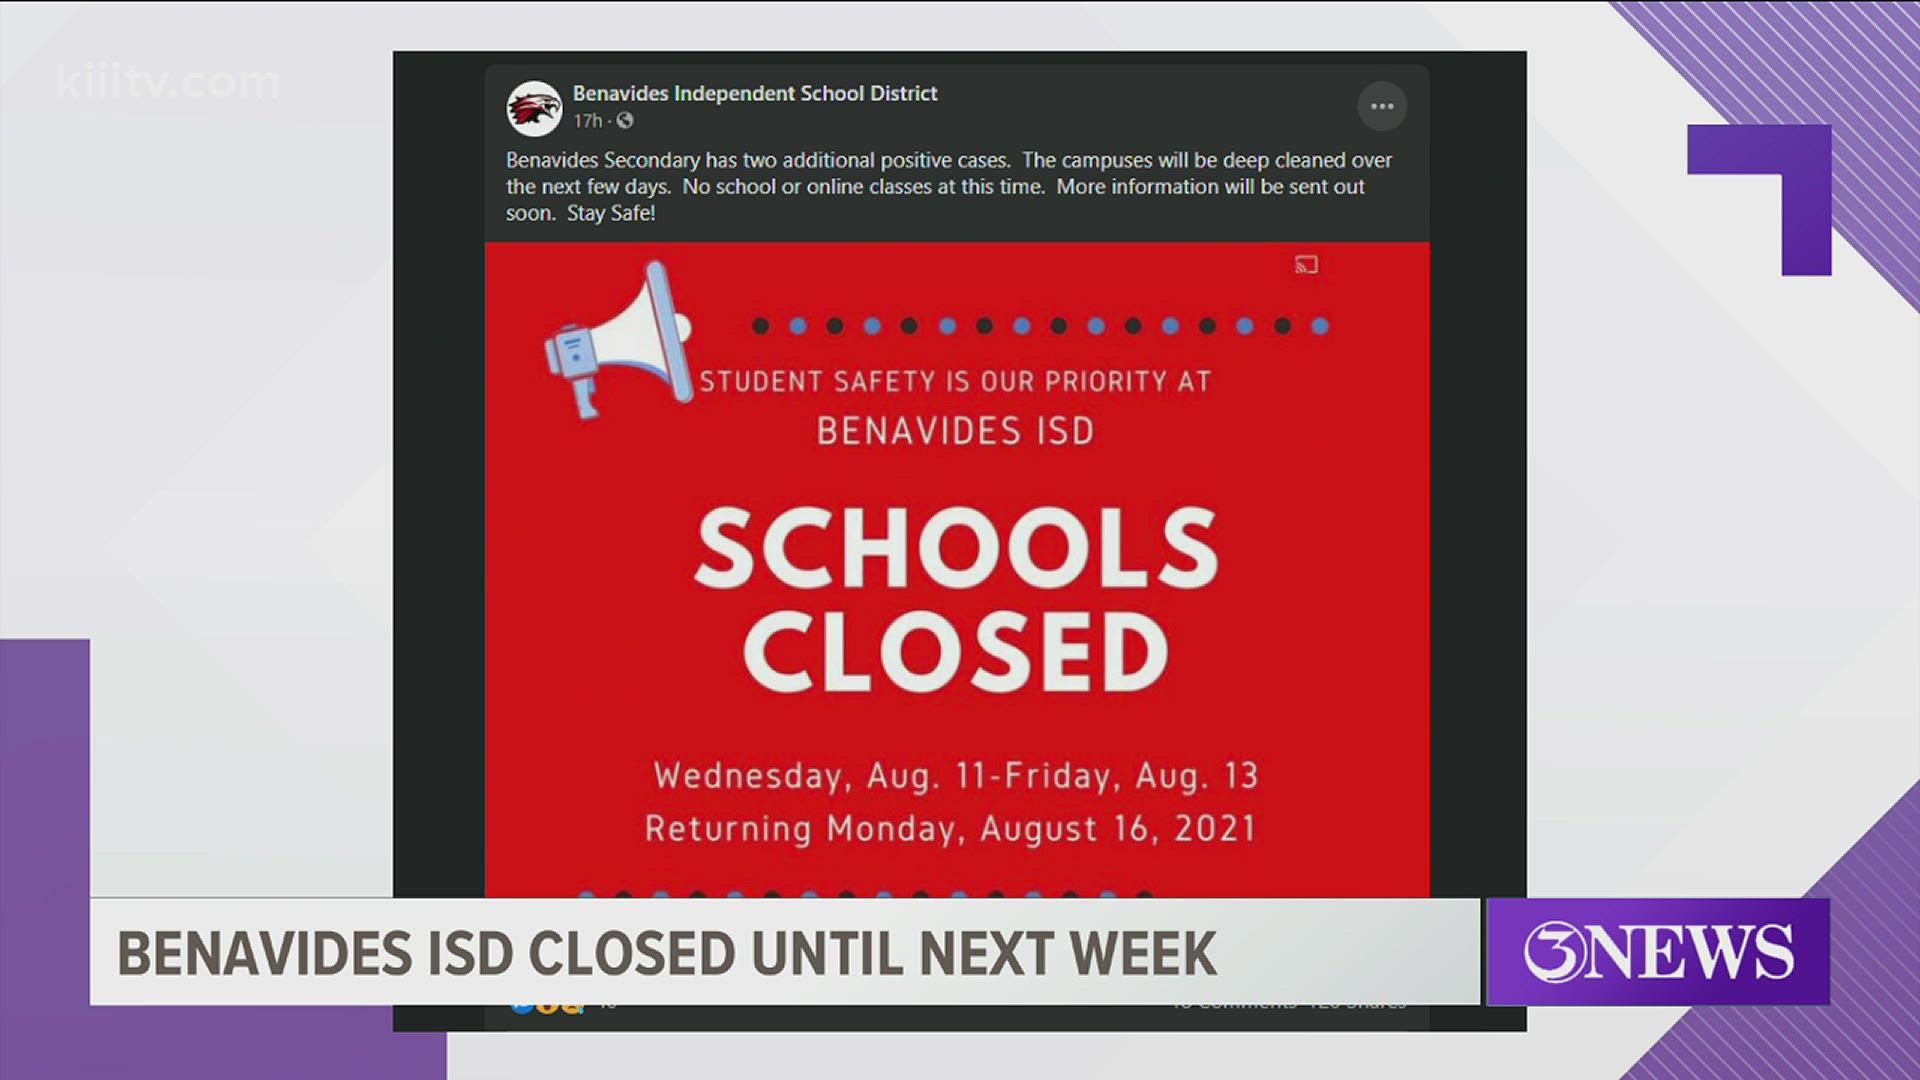 The district said there will be no school, in-person or online, until Monday, August 16.